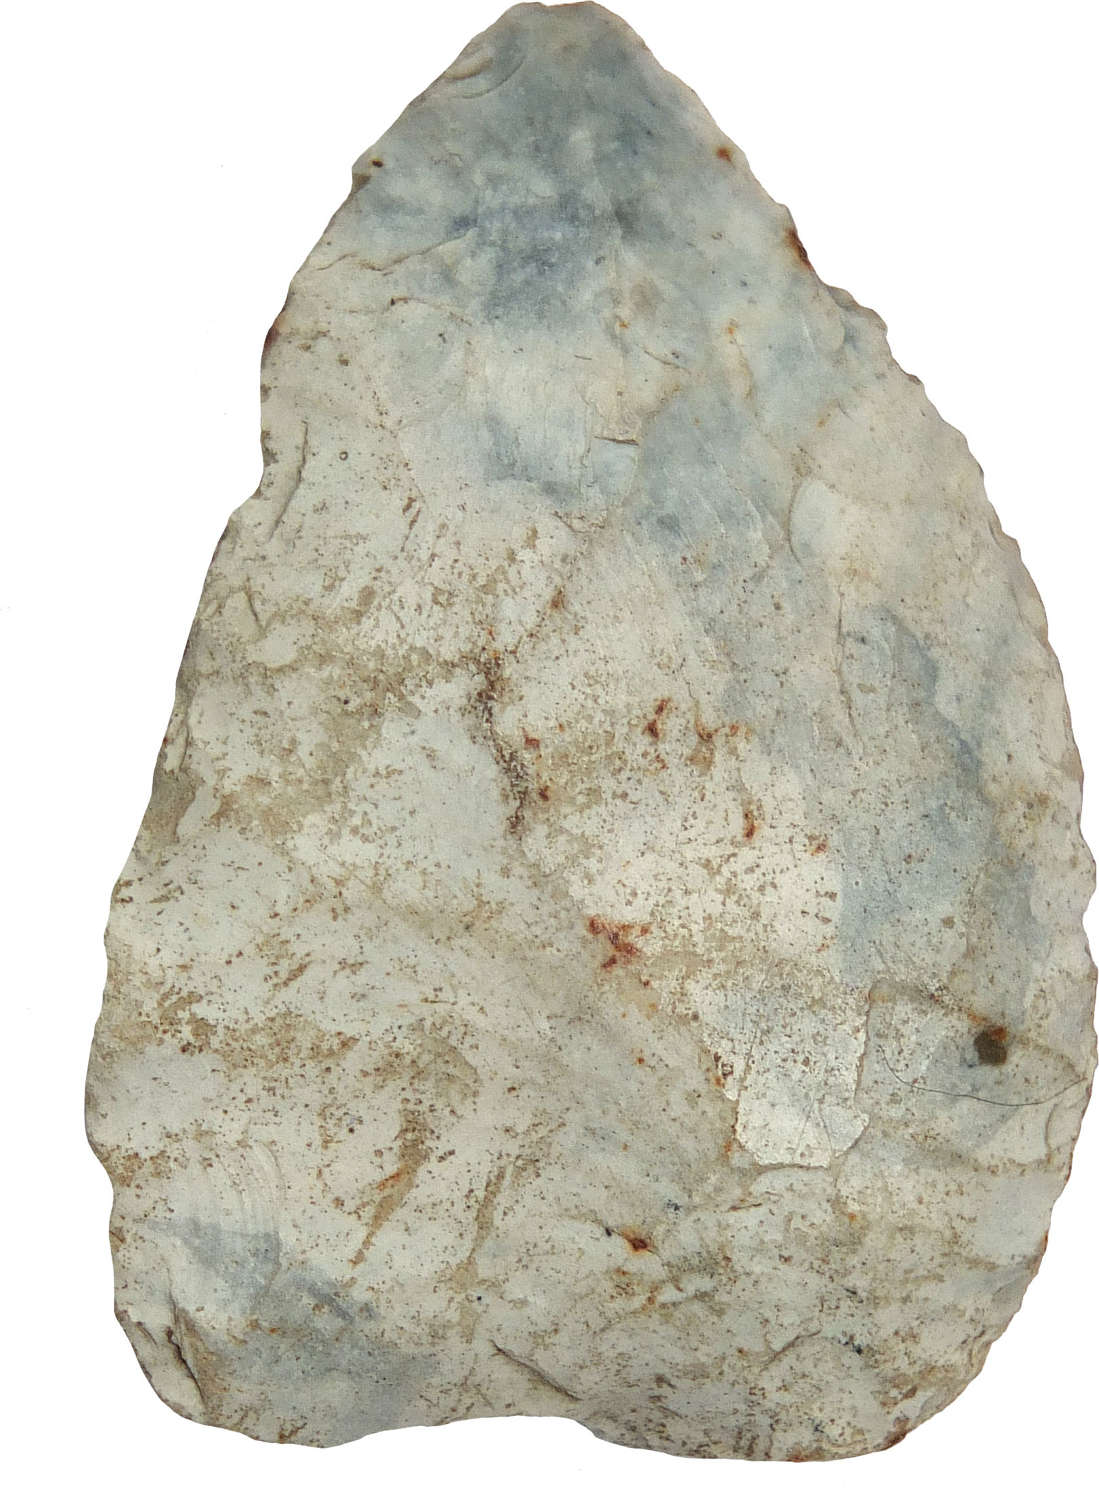 A small Neolithic to Early Bronze Age flint knife found in Suffolk